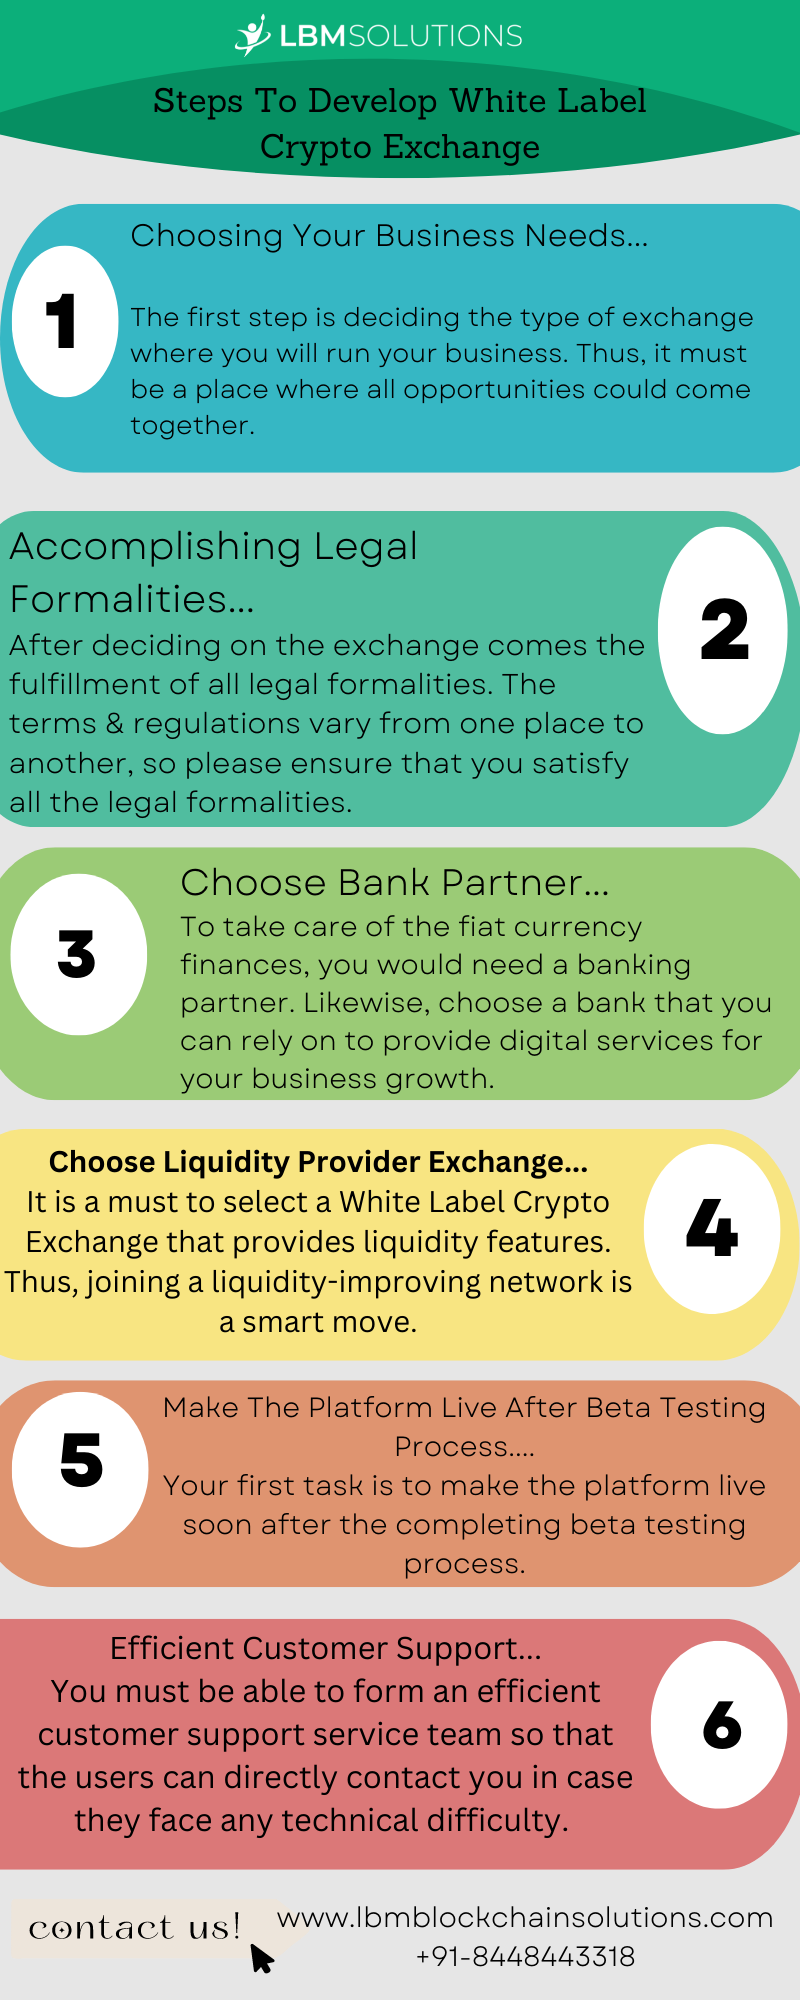 J LBMSOLUTIONS

Choose Liquidity Provider Exchange...
It is a must to select a White Label Crypto 4

Exchange that provides liquidity features.
Thus, joining a liquidity-improving network is
a smart move.

 

contact us! www.lbmblockchainsolutions.com

+91-8448443318